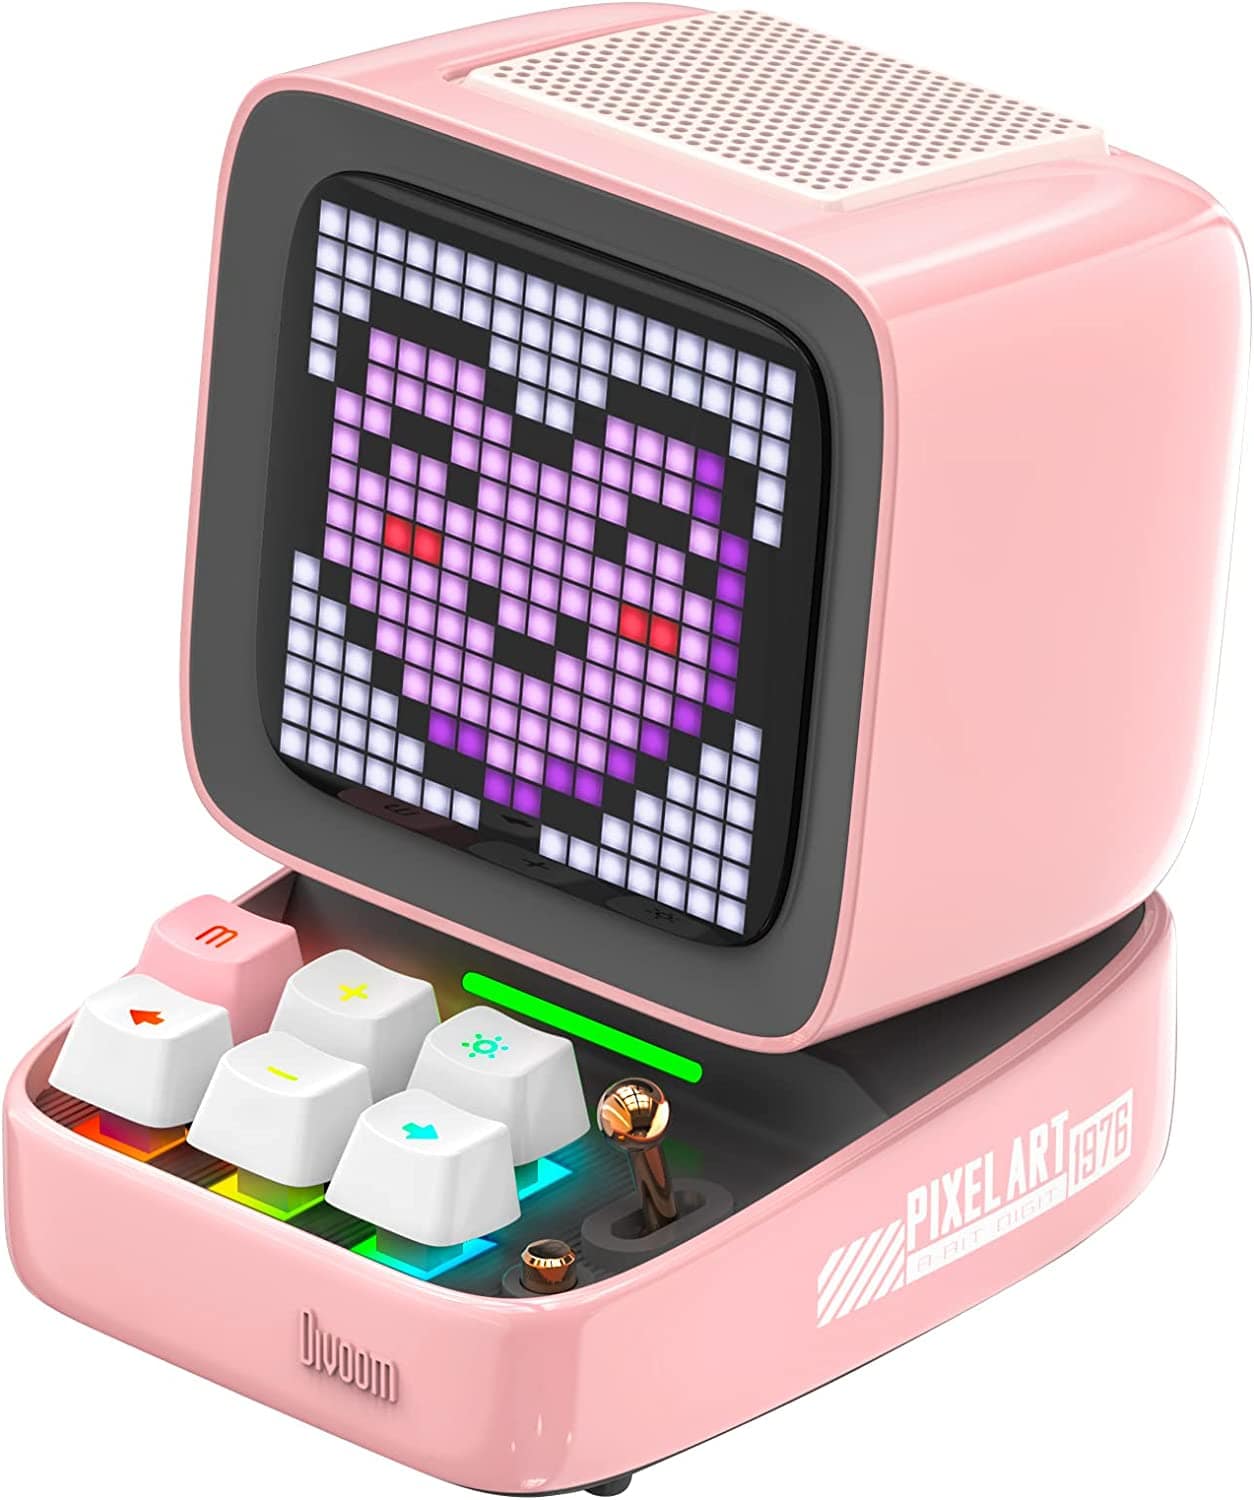 SmartTechShopping Electronics Divoom Ditoo Retro Pixel Art Game Bluetooth Speaker - App-Controlled LED Screen (Pink)